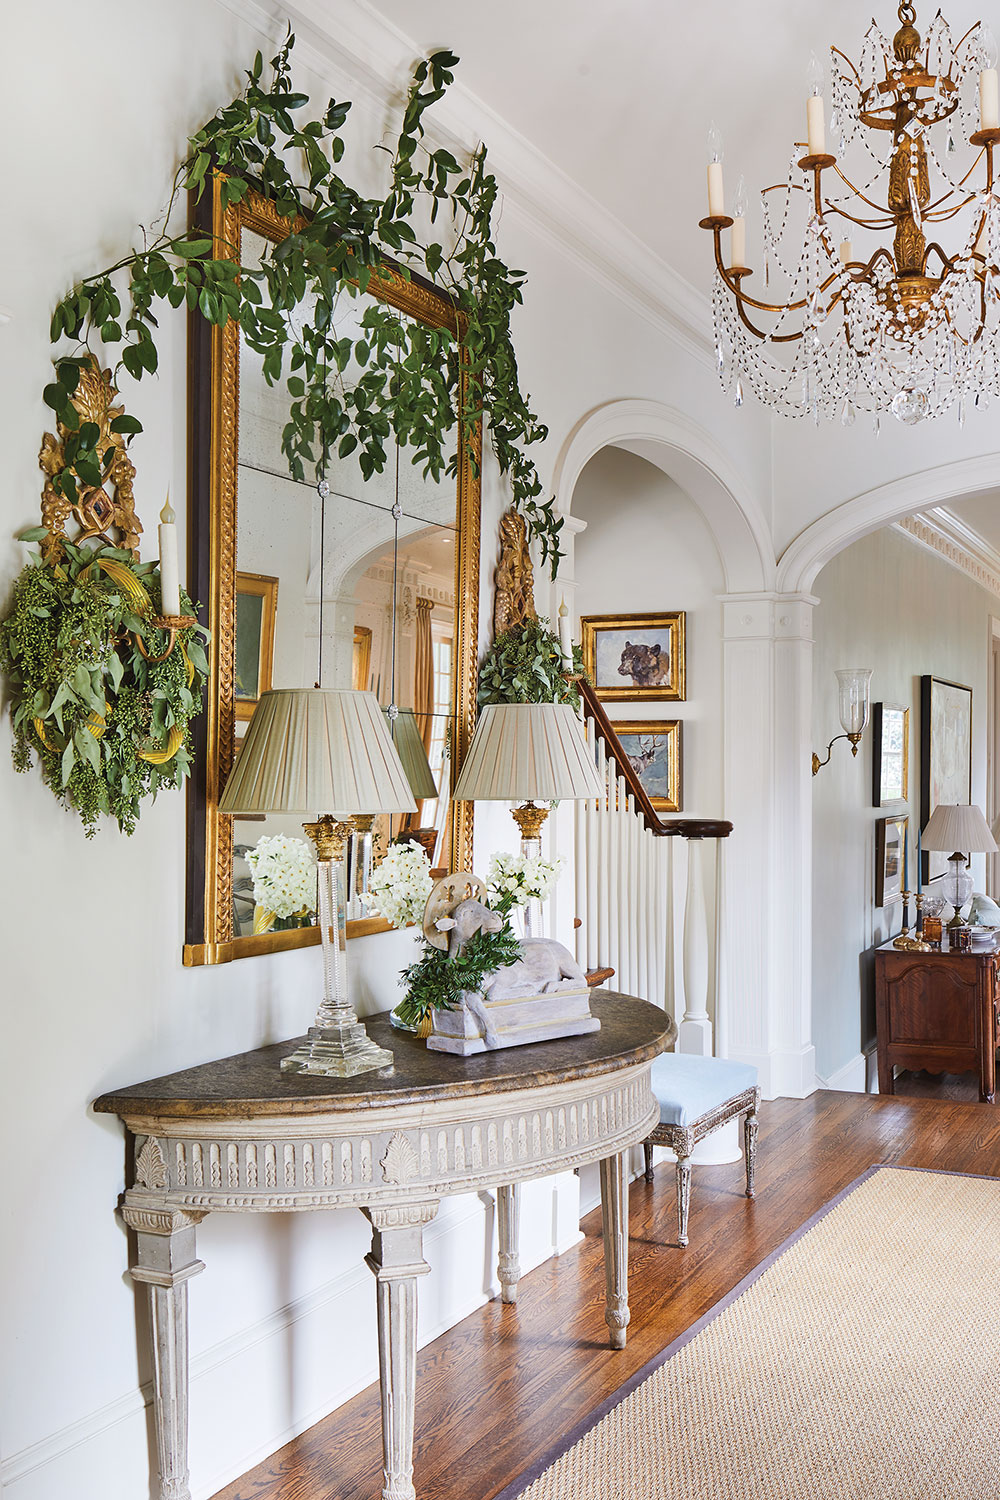 The painted foyer's architecture features high ceilings and gracious arches. Jane Schwab decorated it with a gilded chandelier adorned with delicate crystal swags, a simple sea grass or sisal rug, a semi-circle entry table, and a large gilded antique complemented by Italian sconces on either side.